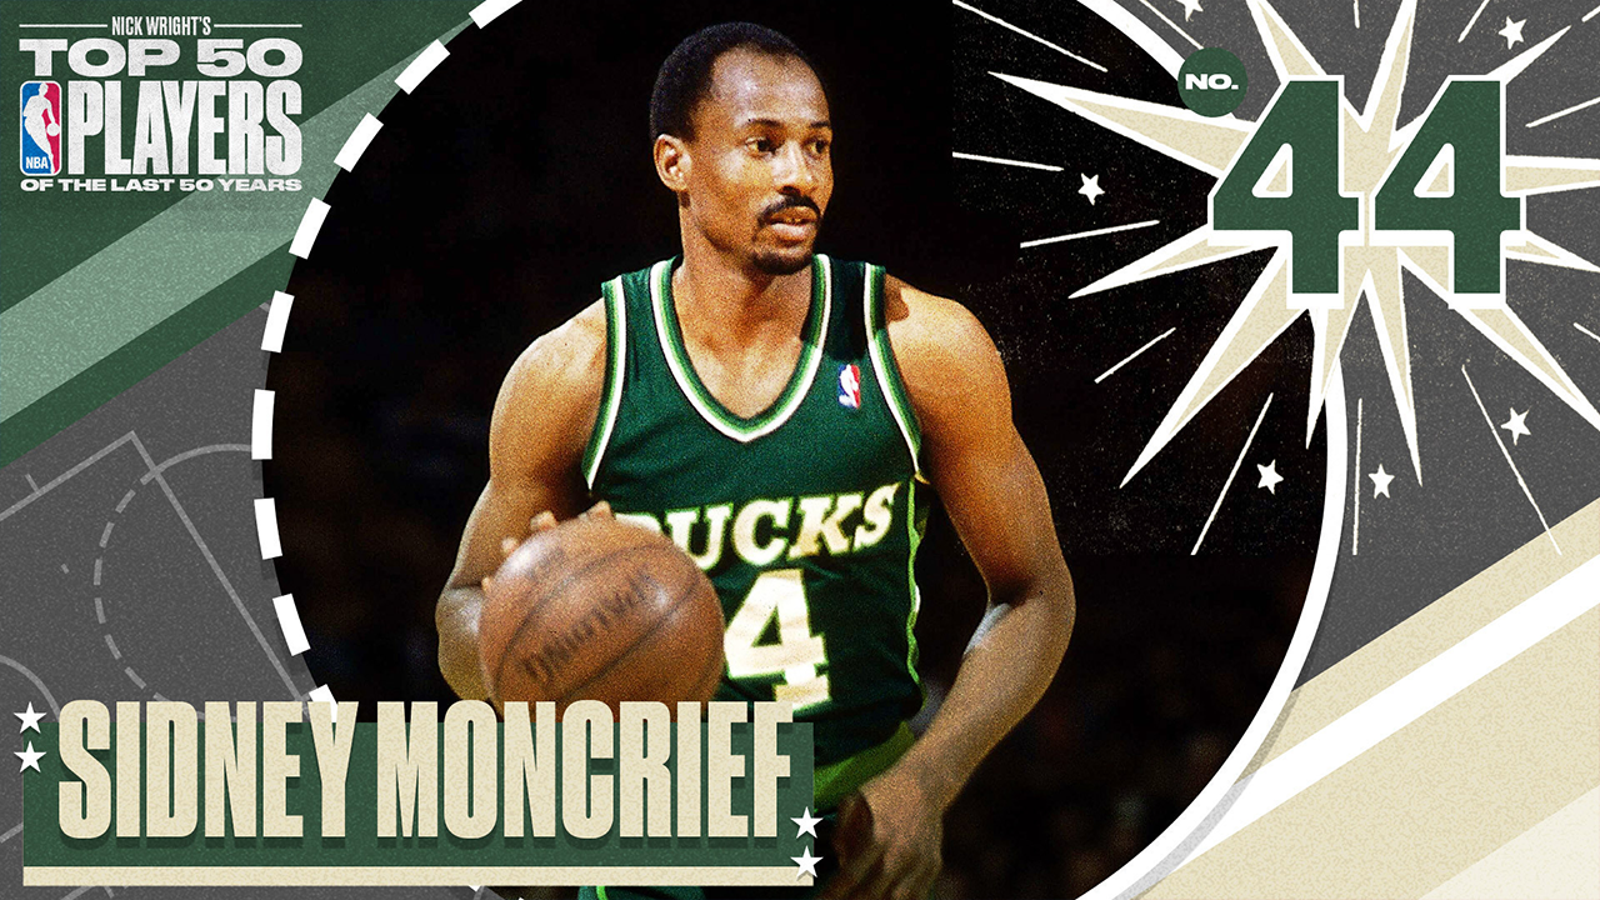 Sidney Moncrief is No. 44 on Nick Wright's Top 50